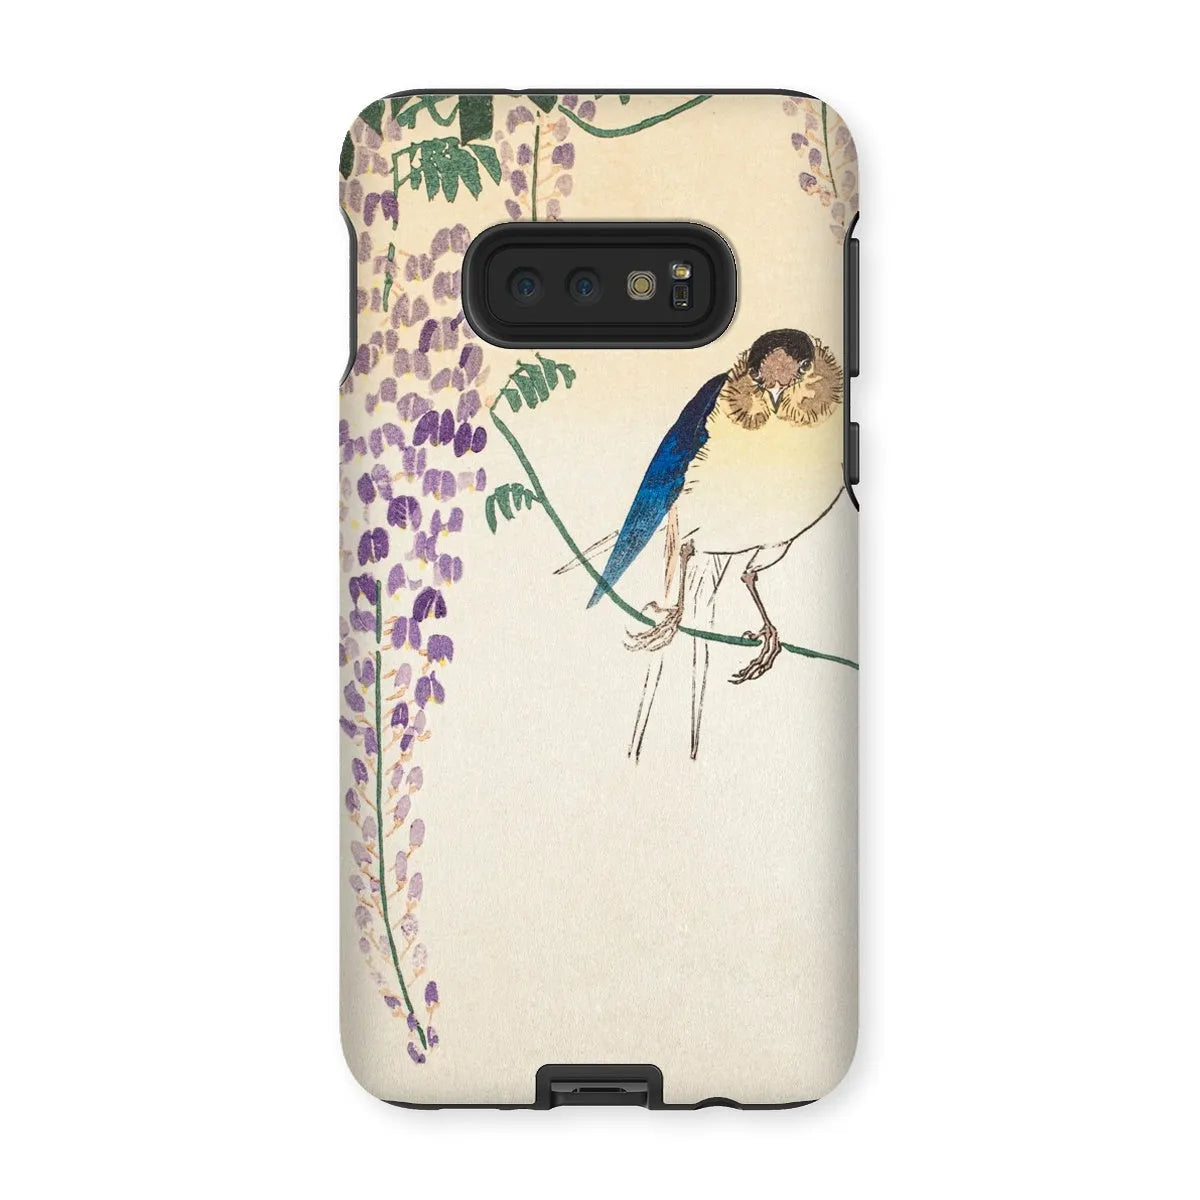 Wisteria And Swallow - Japanese Art Phone Case - Ohara Koson - Samsung Galaxy S10e / Matte - Mobile Phone Cases